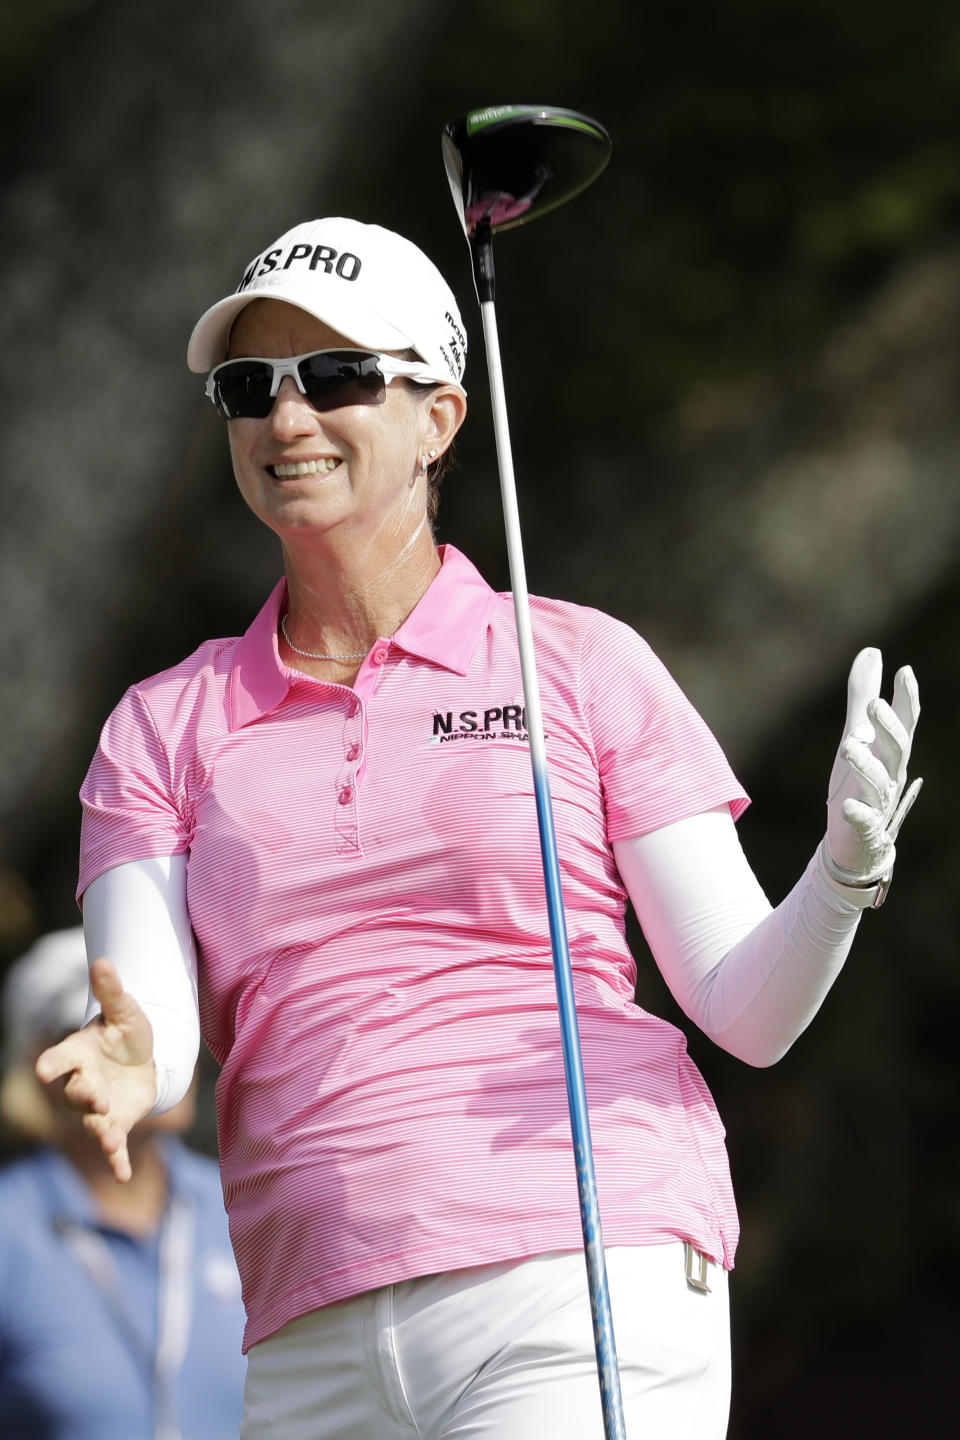 Karrie Webb of Australia, reacts to her shot on ther 15th tee during the second round of the U.S. Women's Open golf tournament, Friday, May 31, 2019, in Charleston, S.C. (AP Photo/Steve Helber)